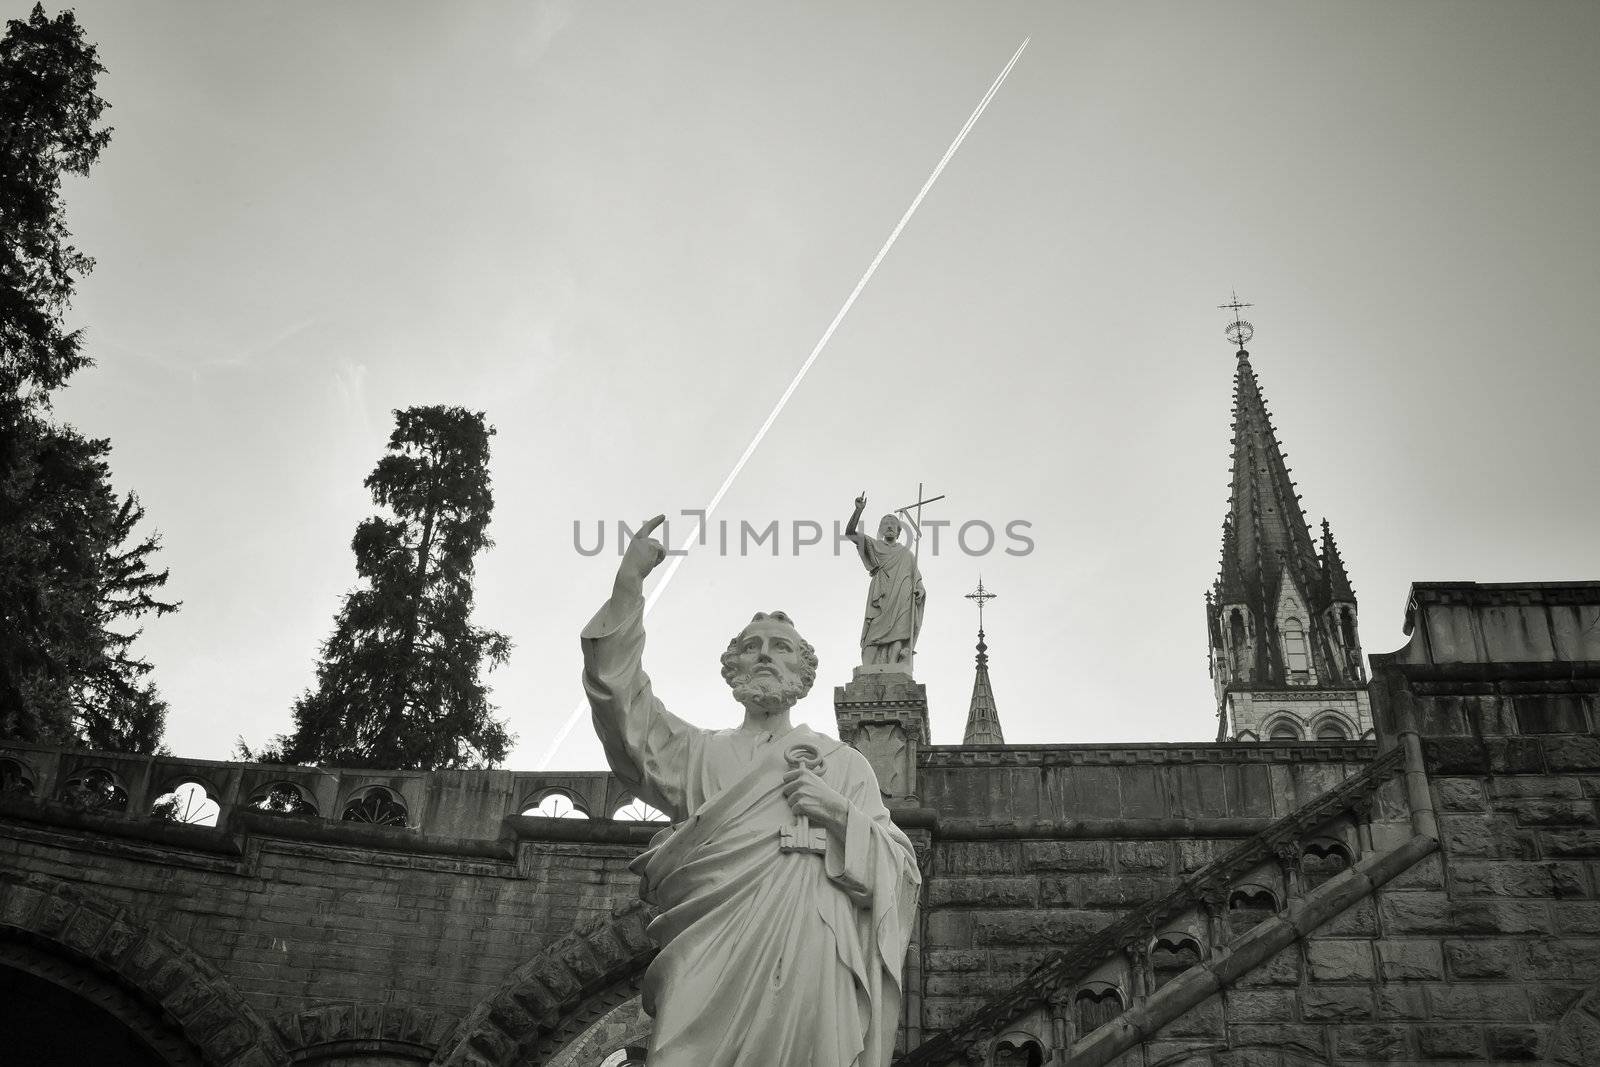 Humorous monochrome capture of jet plane in the air and pointing statues in front of of the dome of the Basilica of Our Lady of the Rosary of Lourdes, France. Concept value.